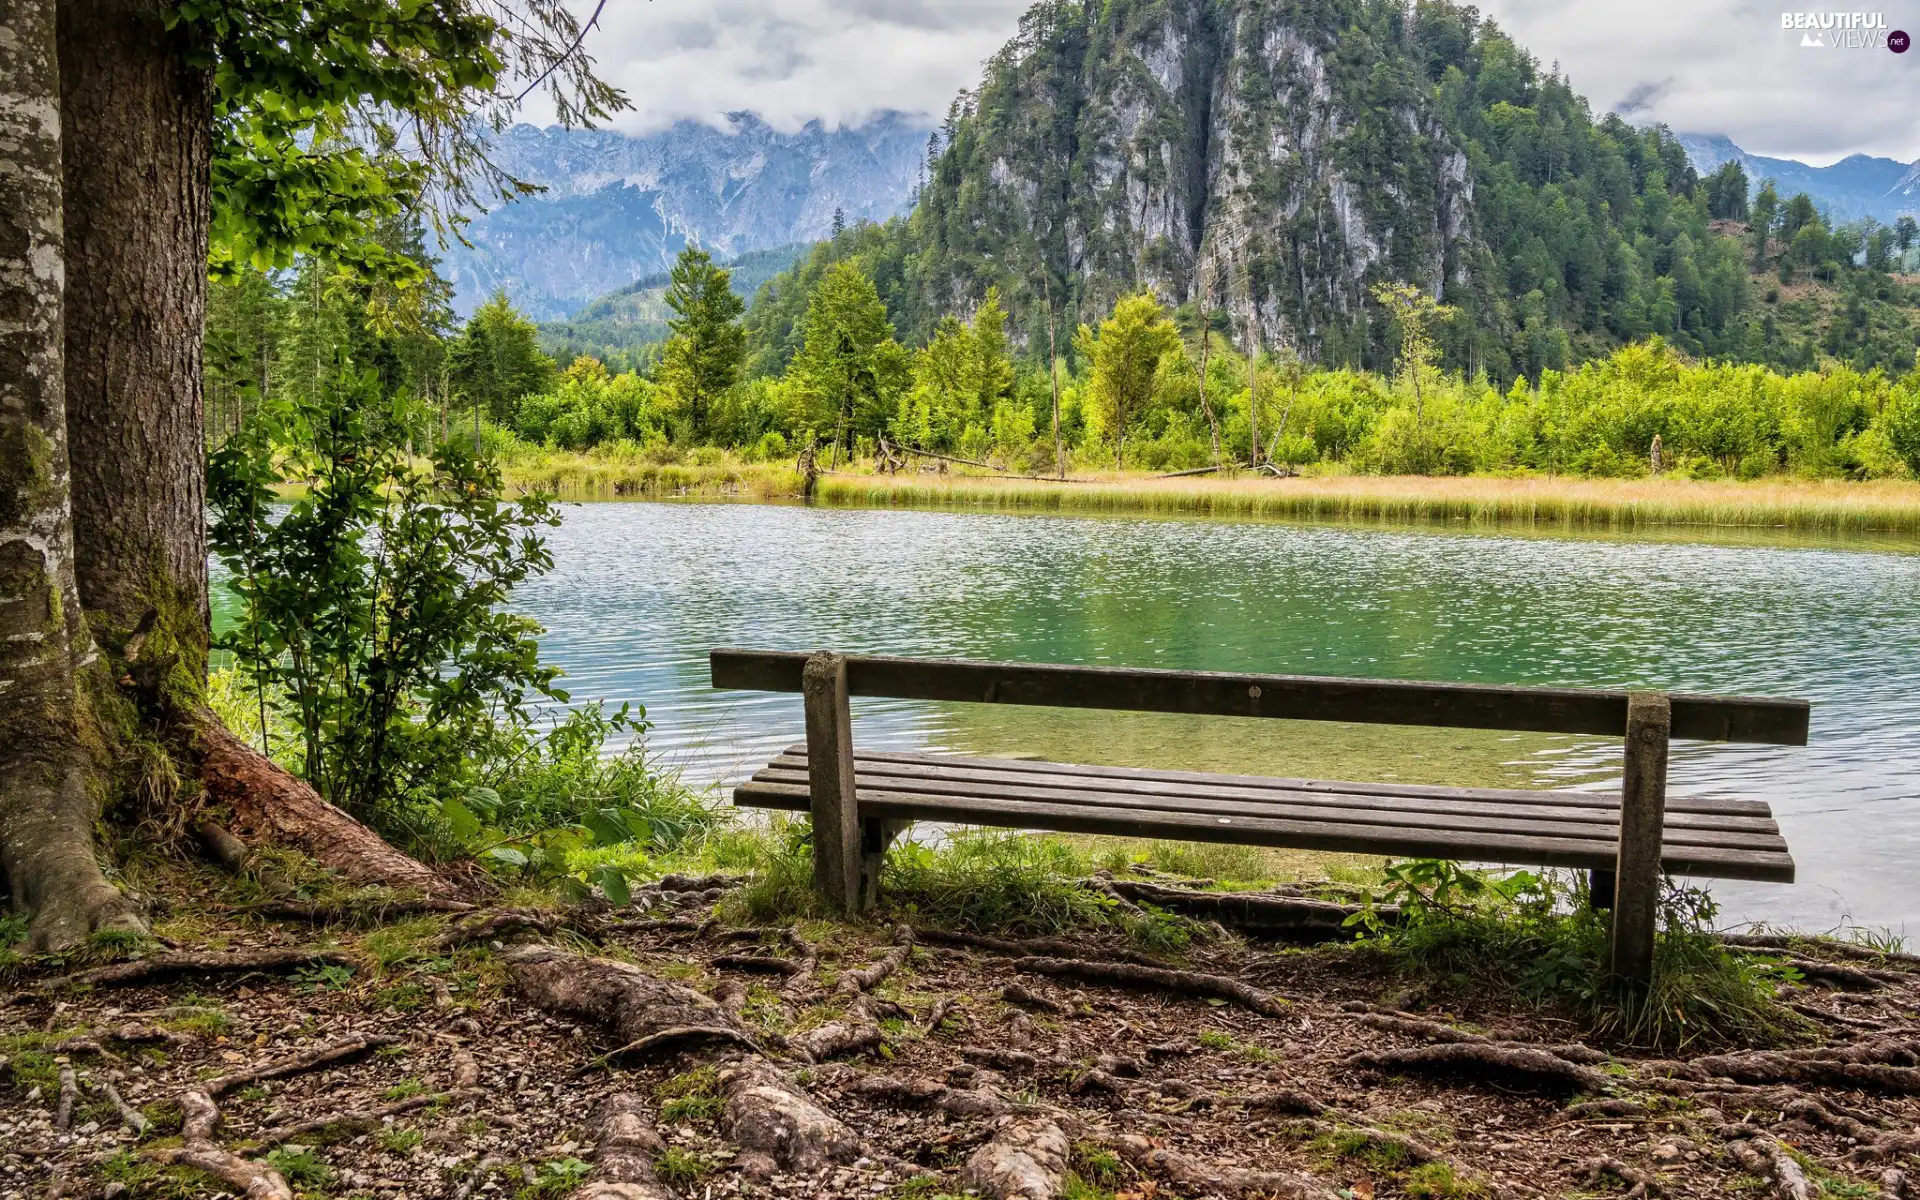 River, Mountains, trees, viewes, Bench